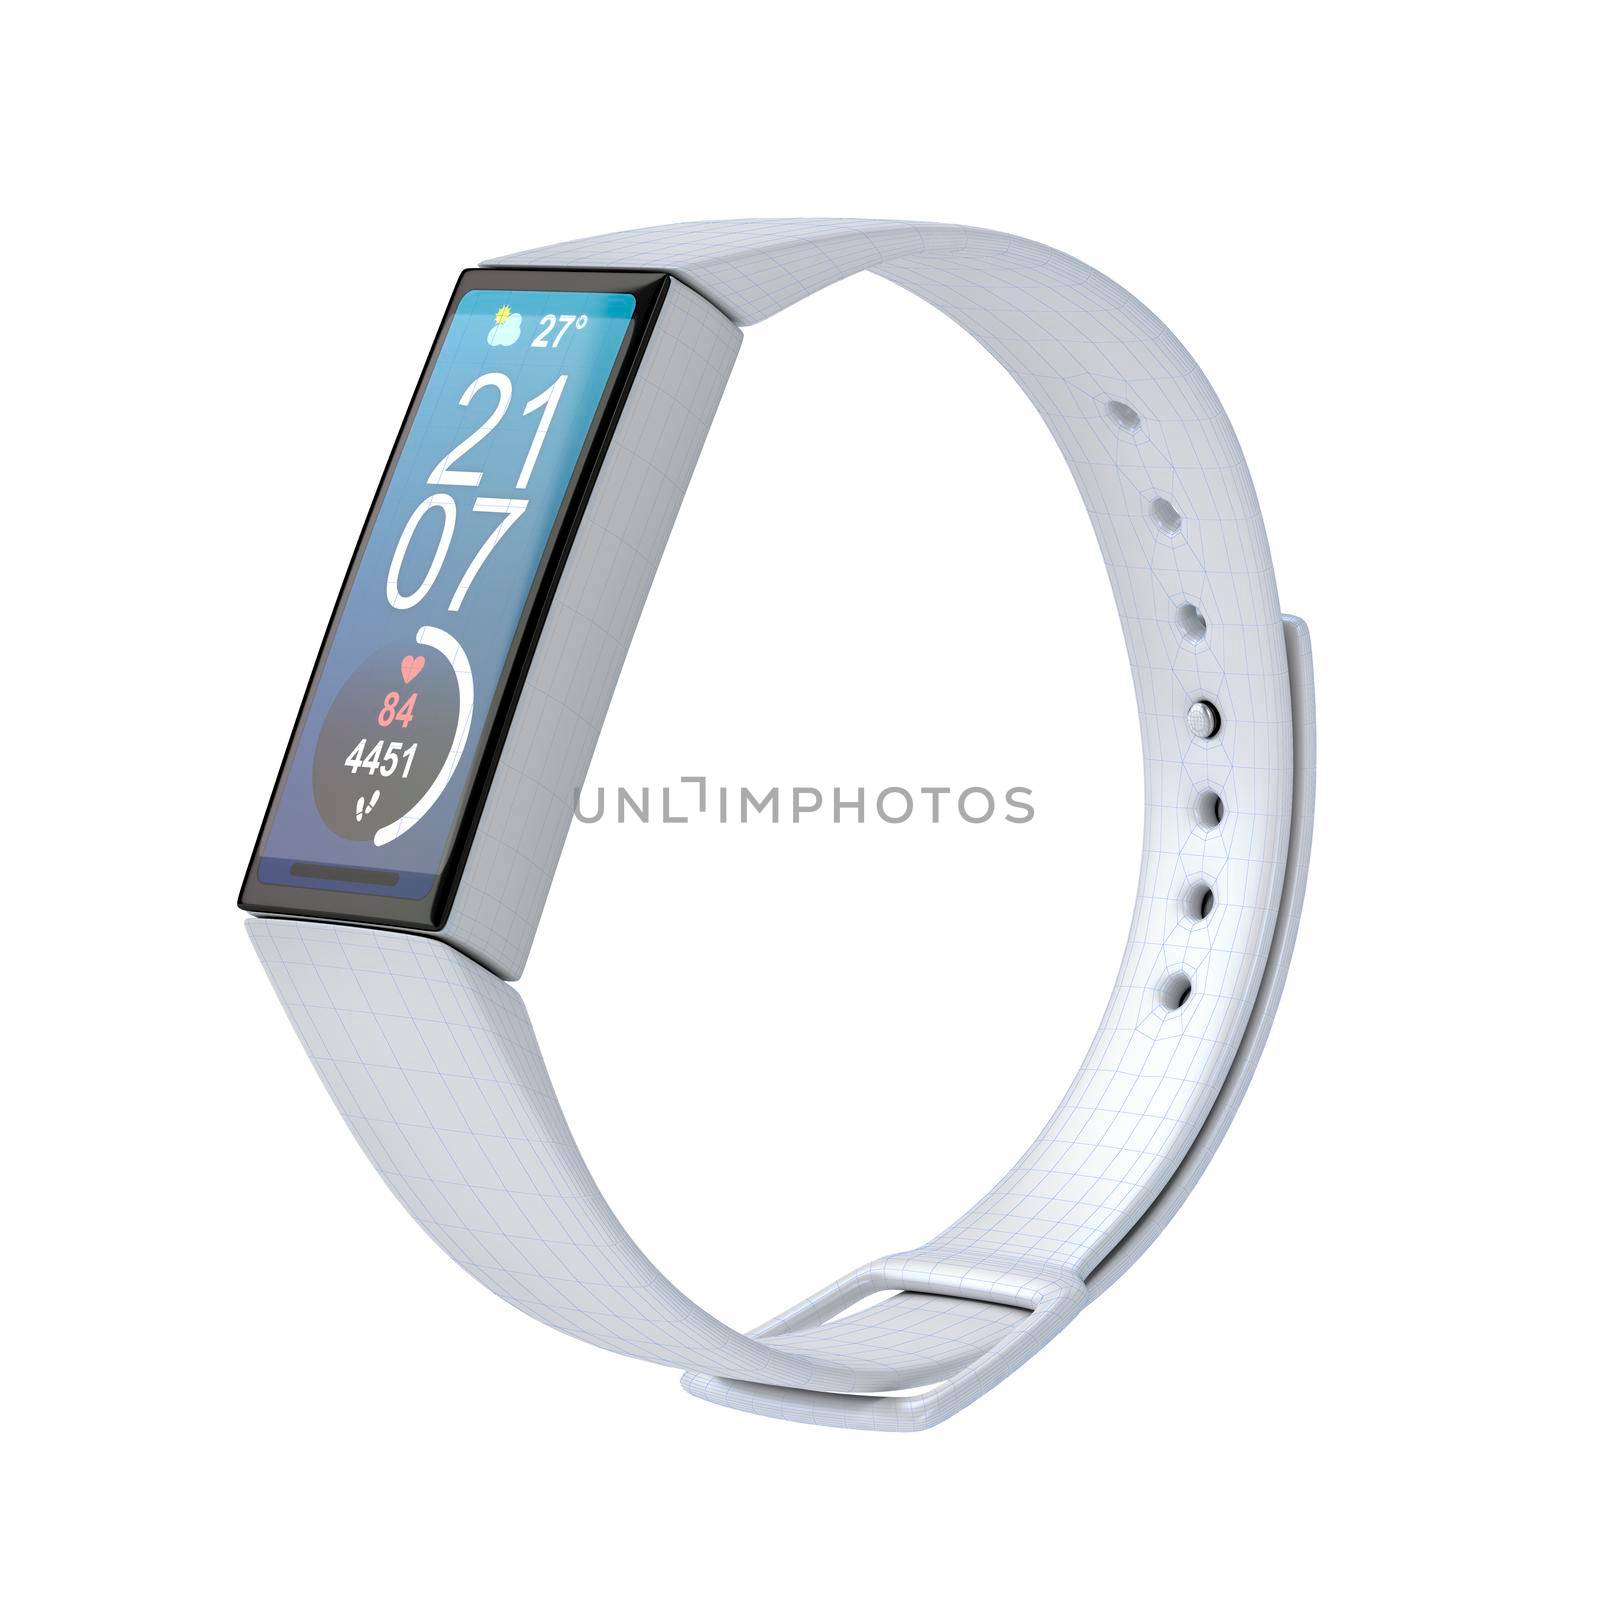 3D model of fitness tracker by magraphics